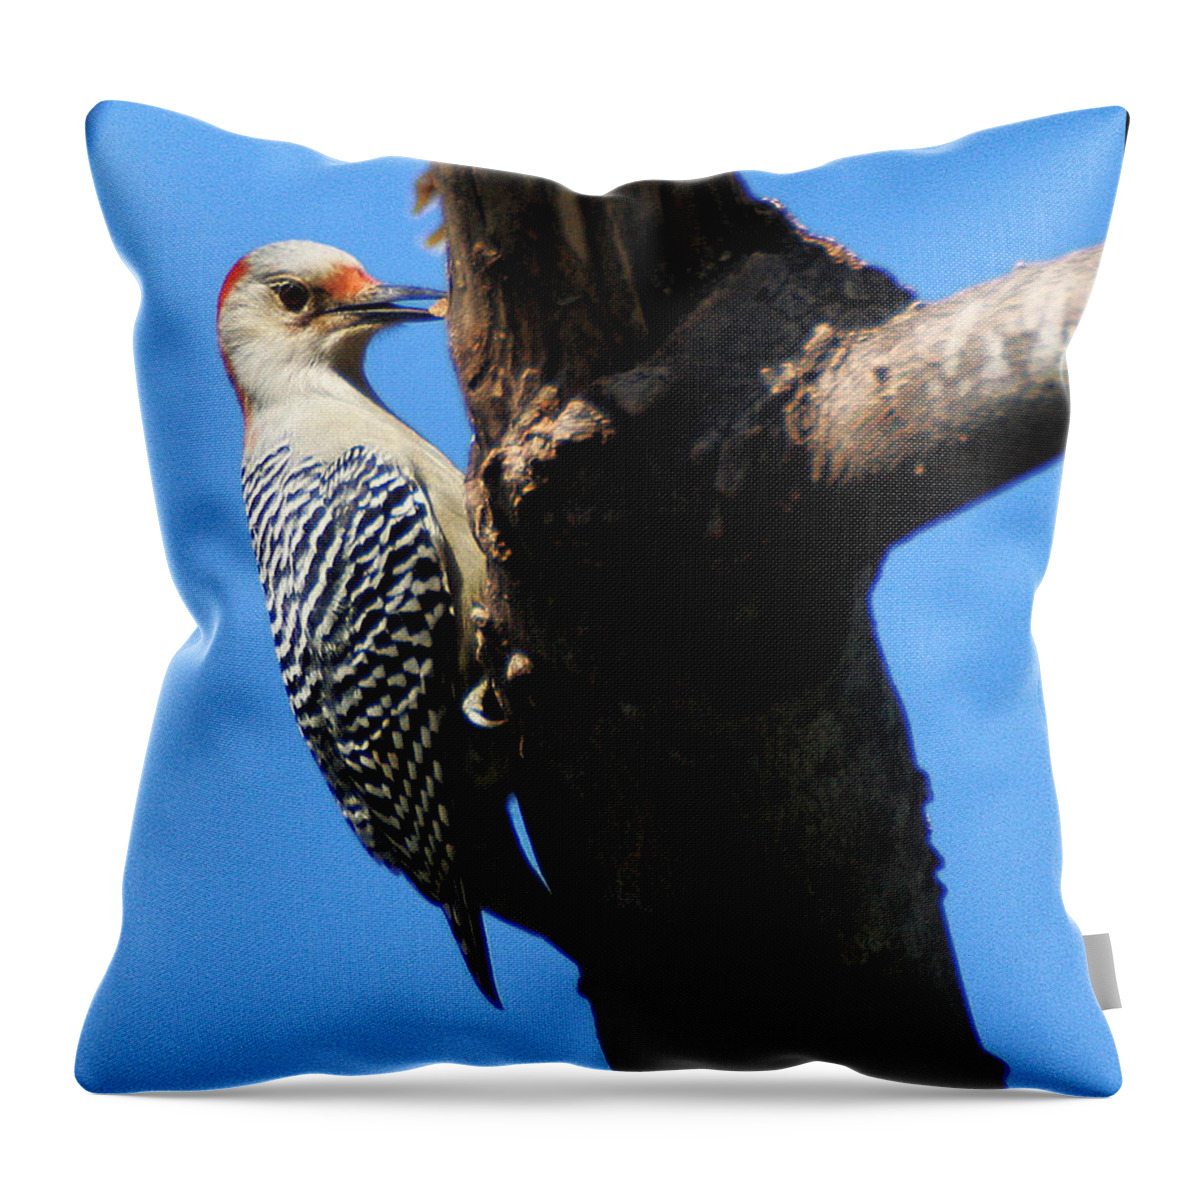 Wildlife Throw Pillow featuring the photograph Woodpecker Feeding by William Selander